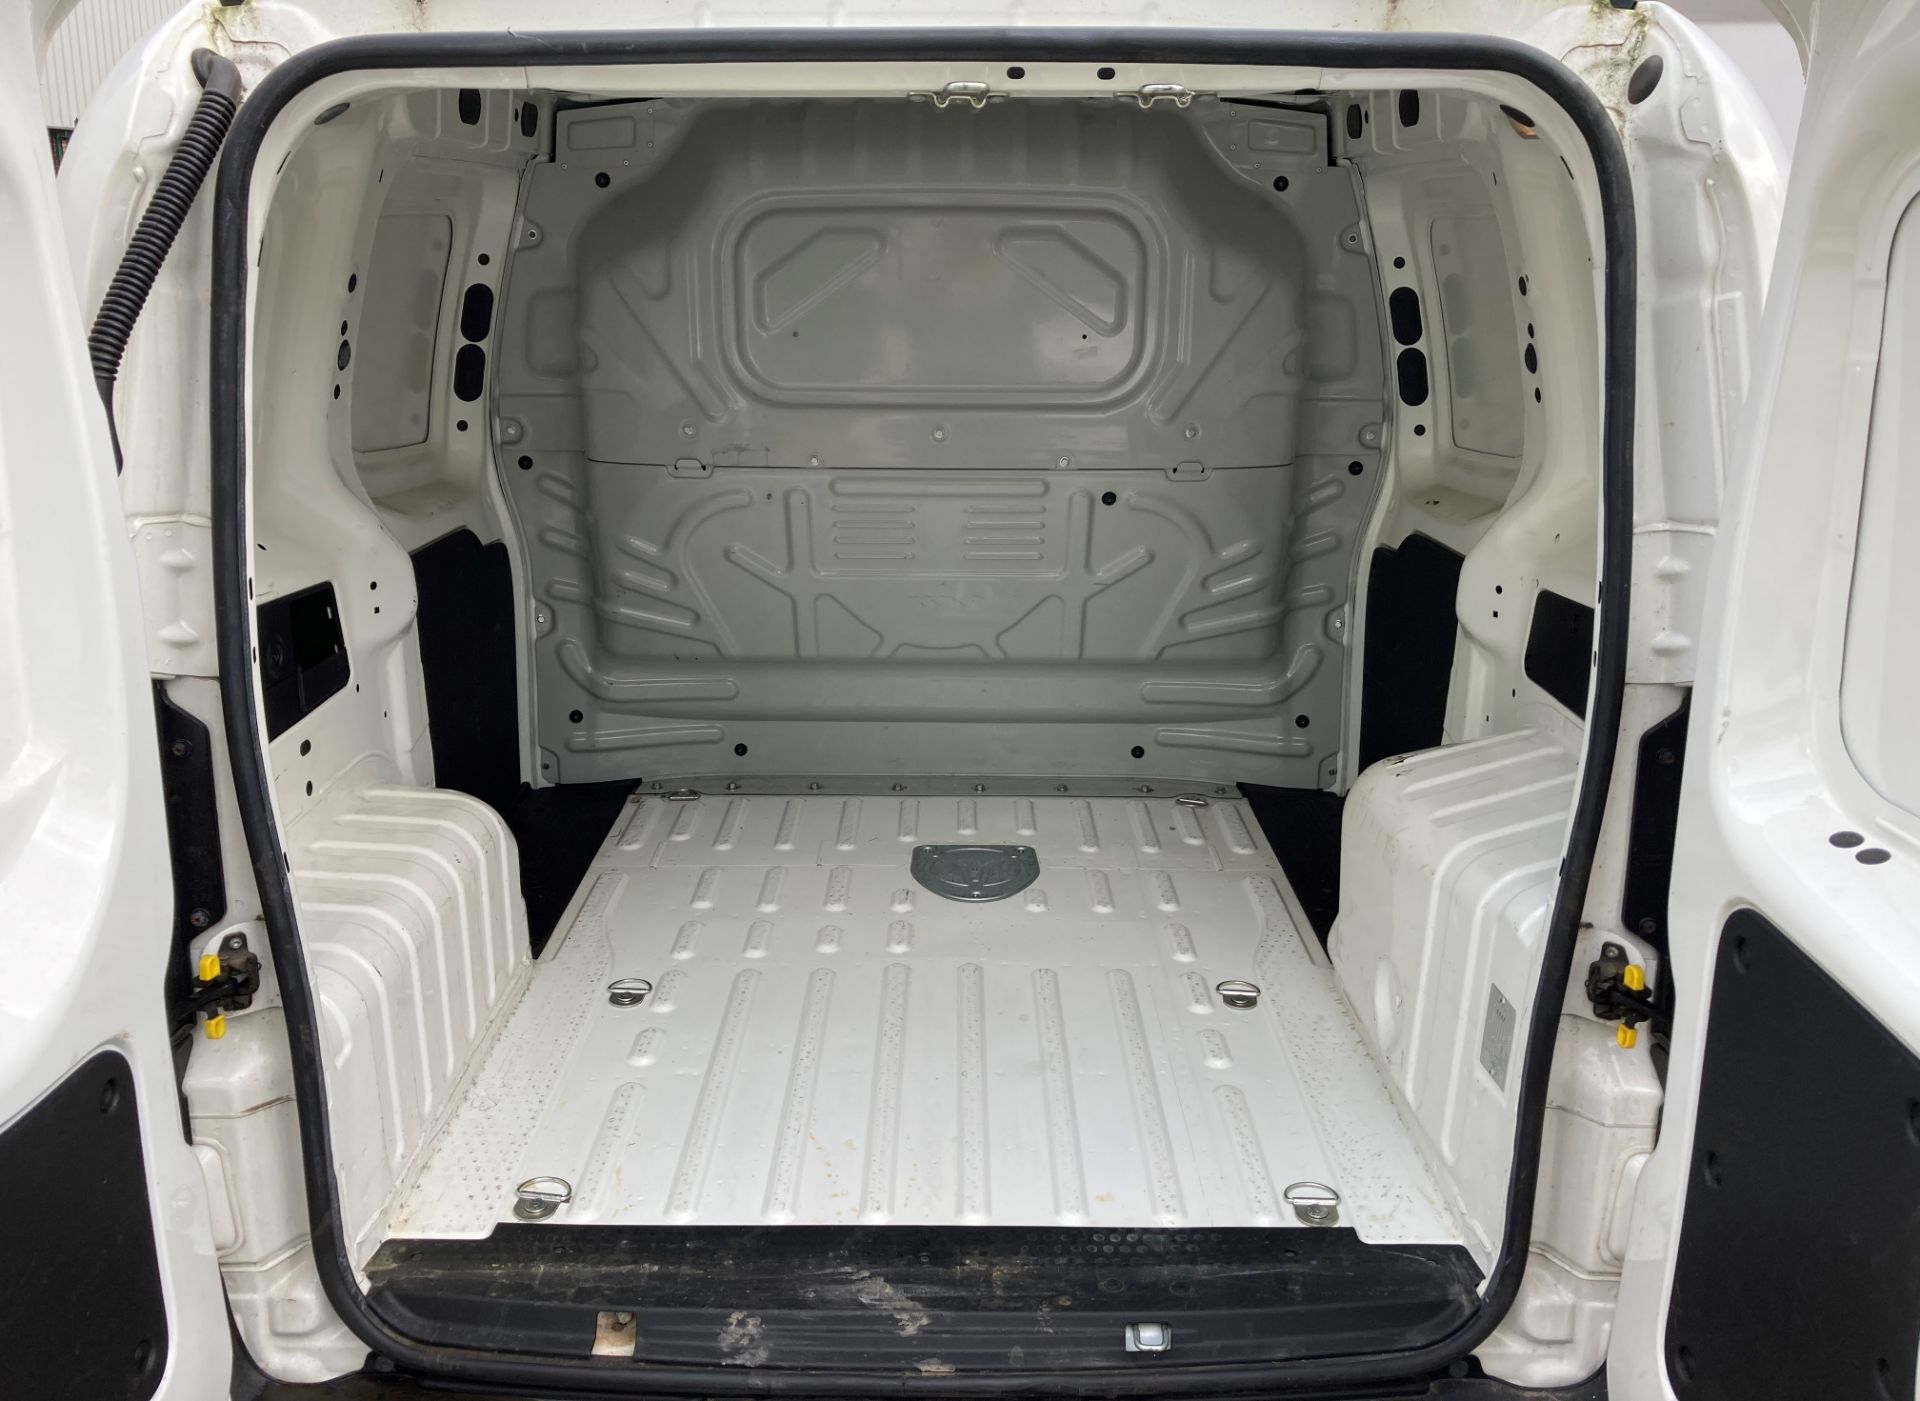 PEUGEOT BIPPER 1.2 ATV HDi PANEL VAN - Diesel - White. On the instructions of: A retained client. - Image 11 of 13